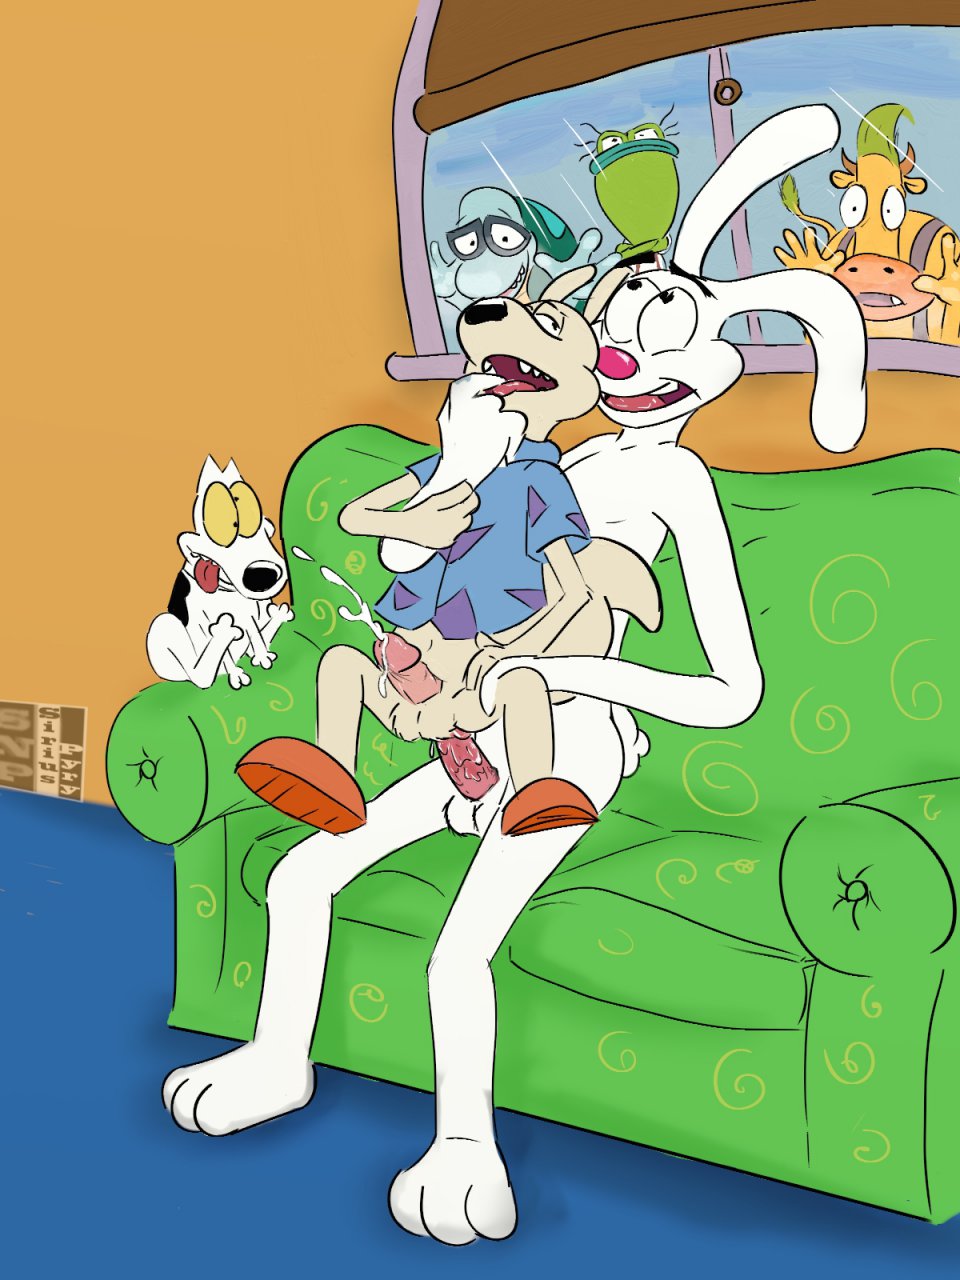 sex phone life modern rocko's Ben 10: a day with gwen